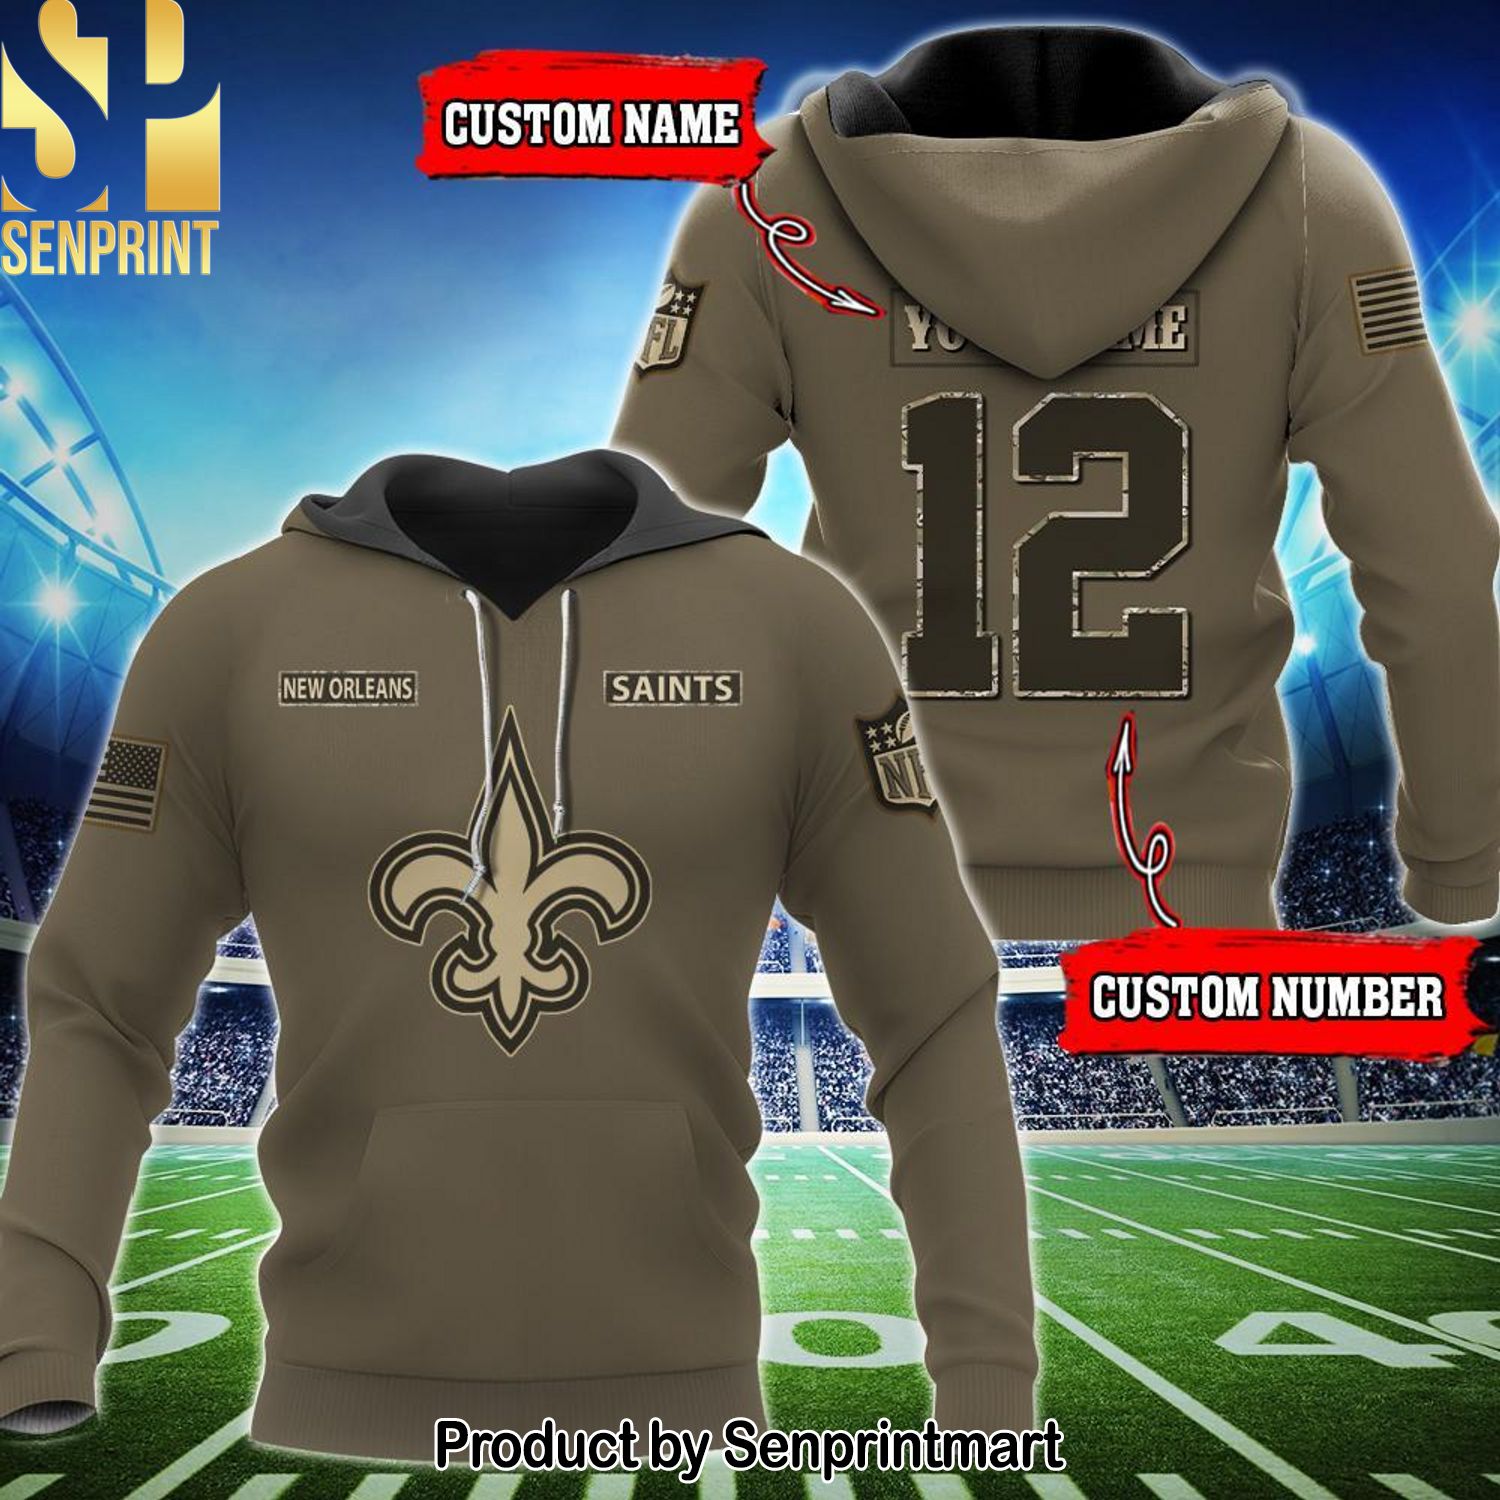 Personalized Your Name And Custom Number NFL New Orleans Saints Awesome Outfit Shirt